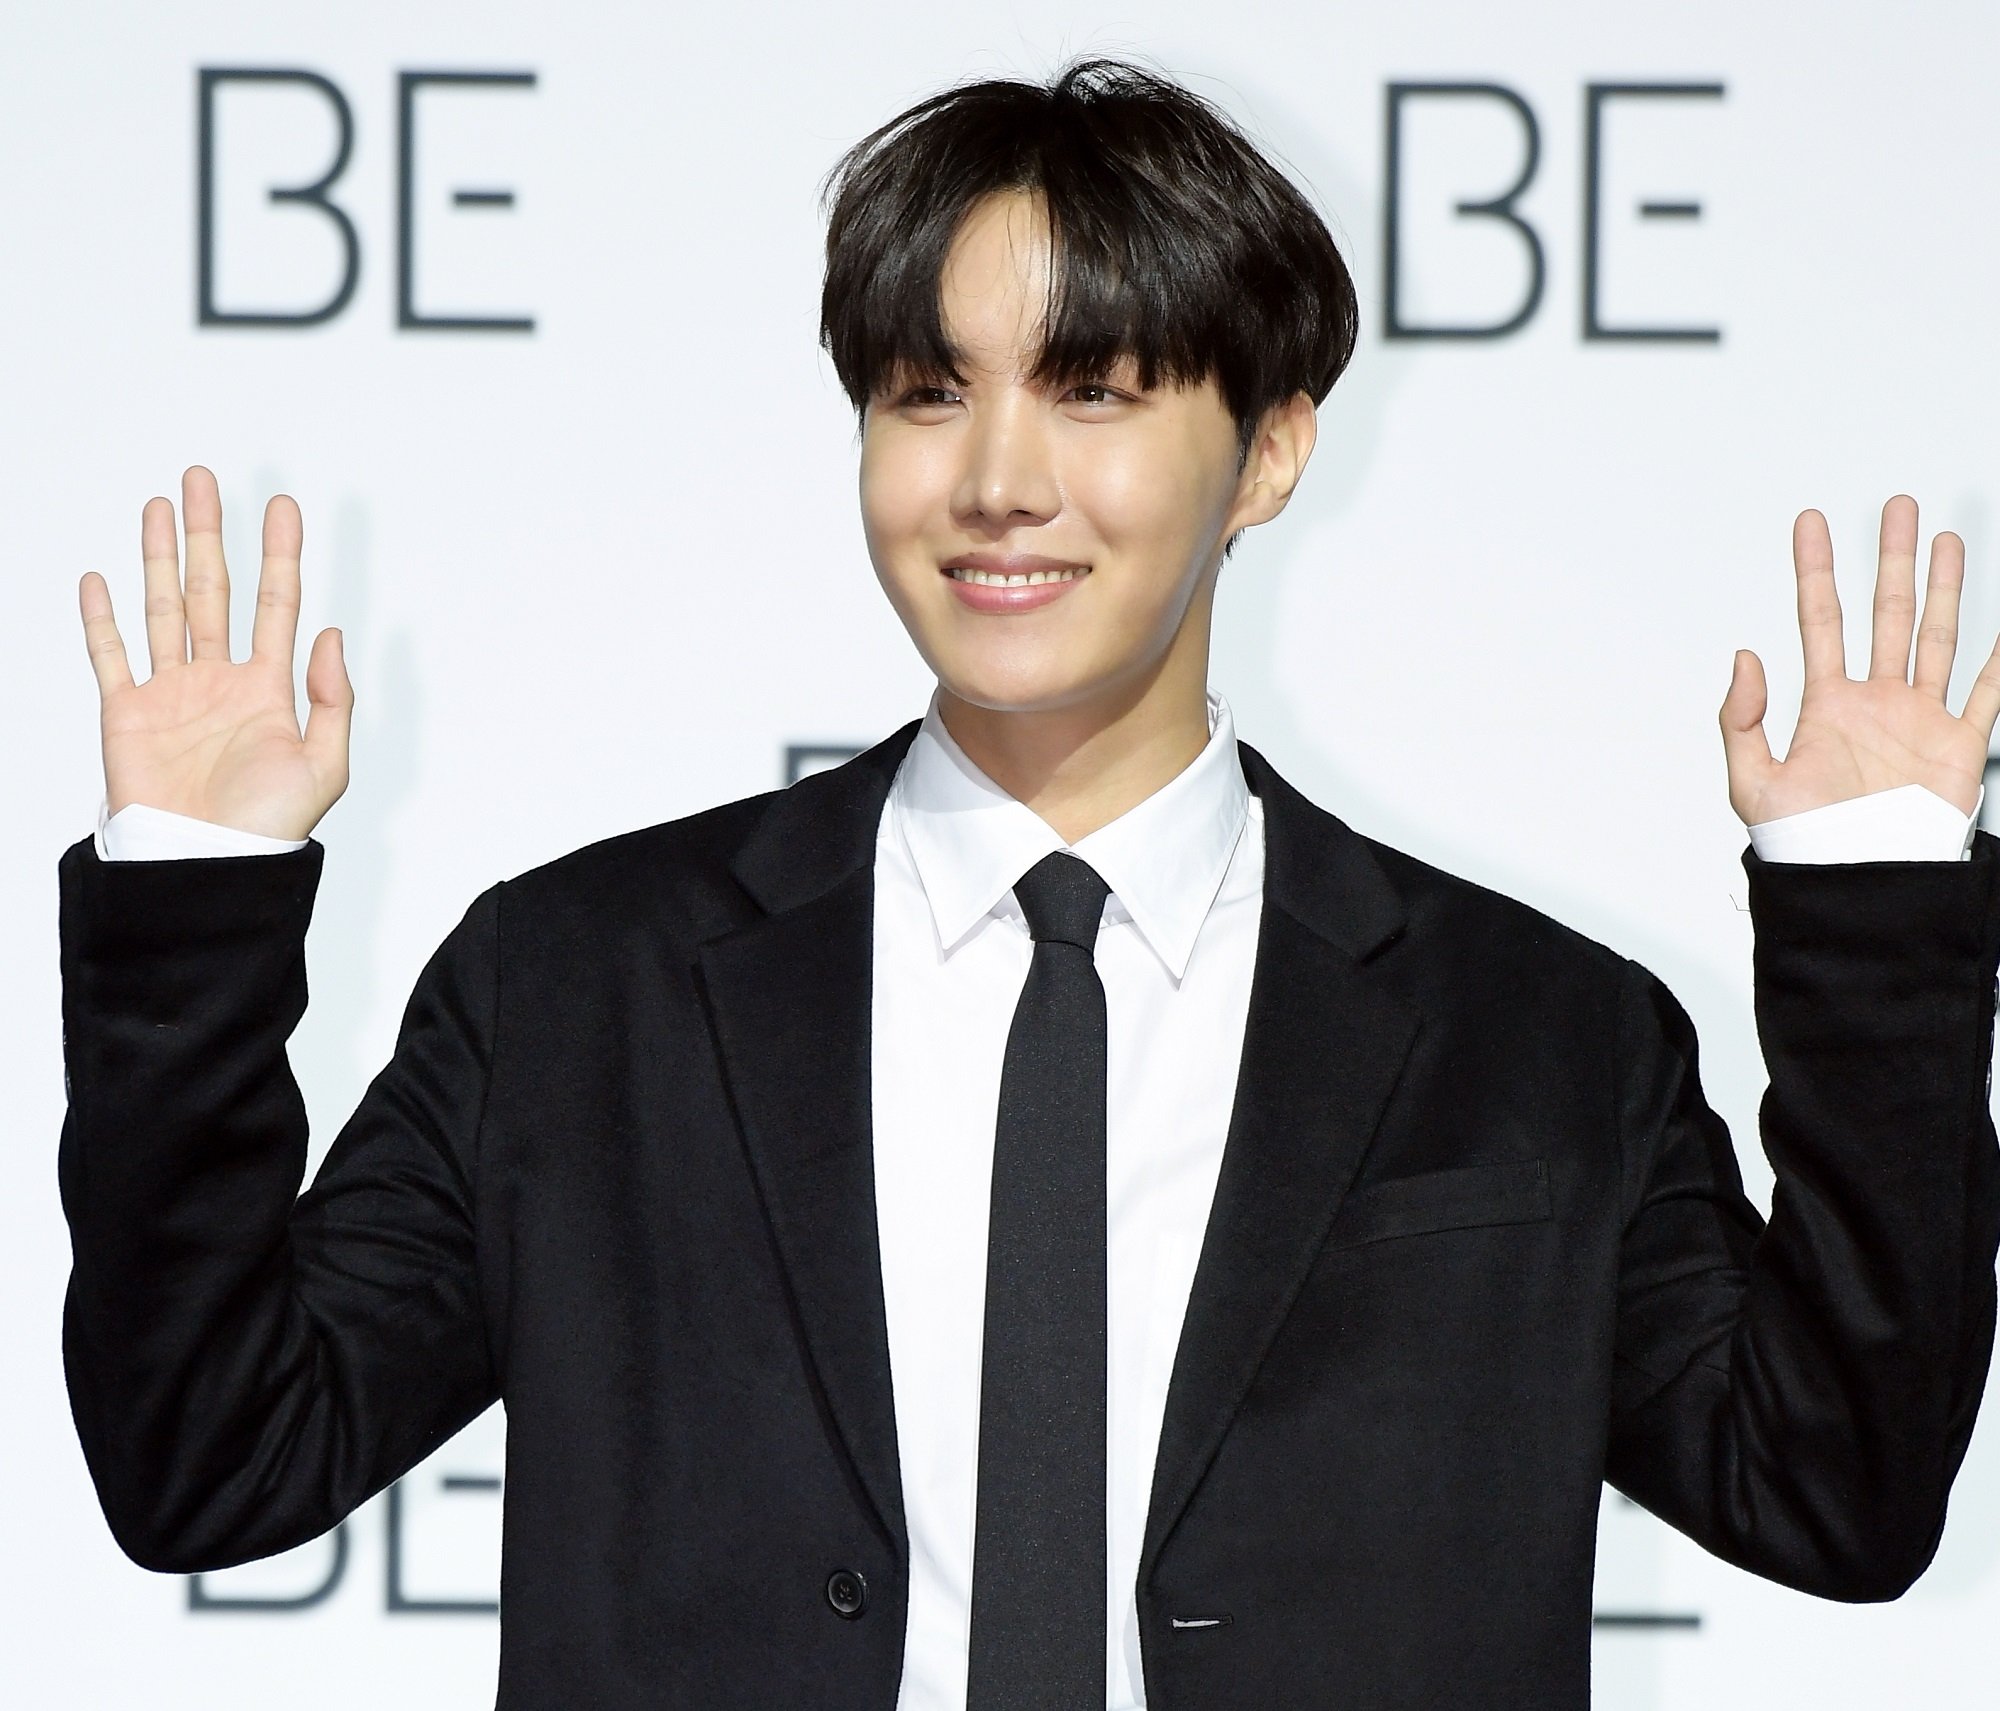 J-Hope of BTS holds up his hands at BTS' press conference for their album 'BE'